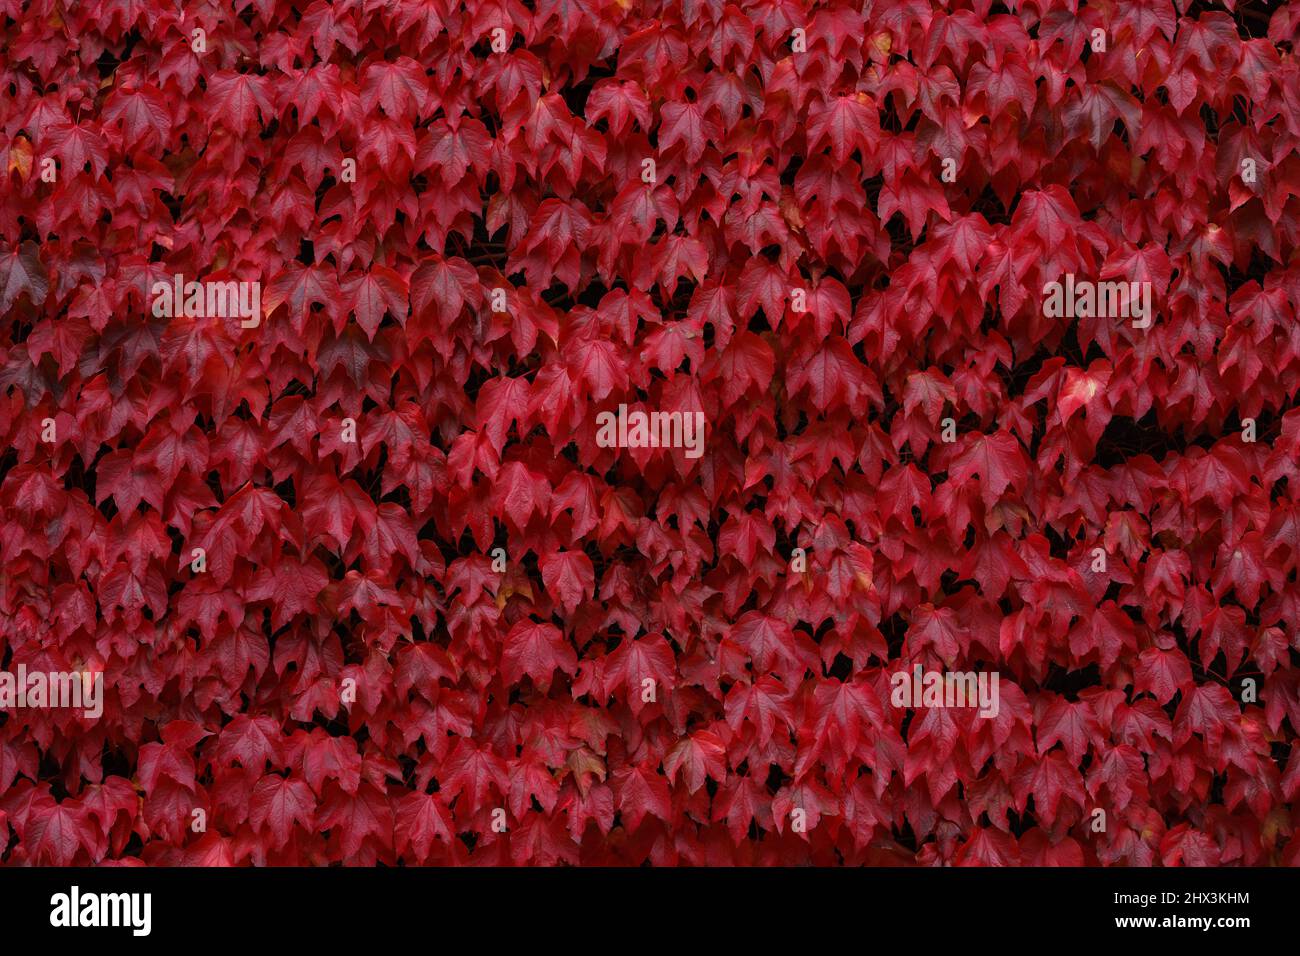 Autumnal ivy leaves in green and red Stock Photo